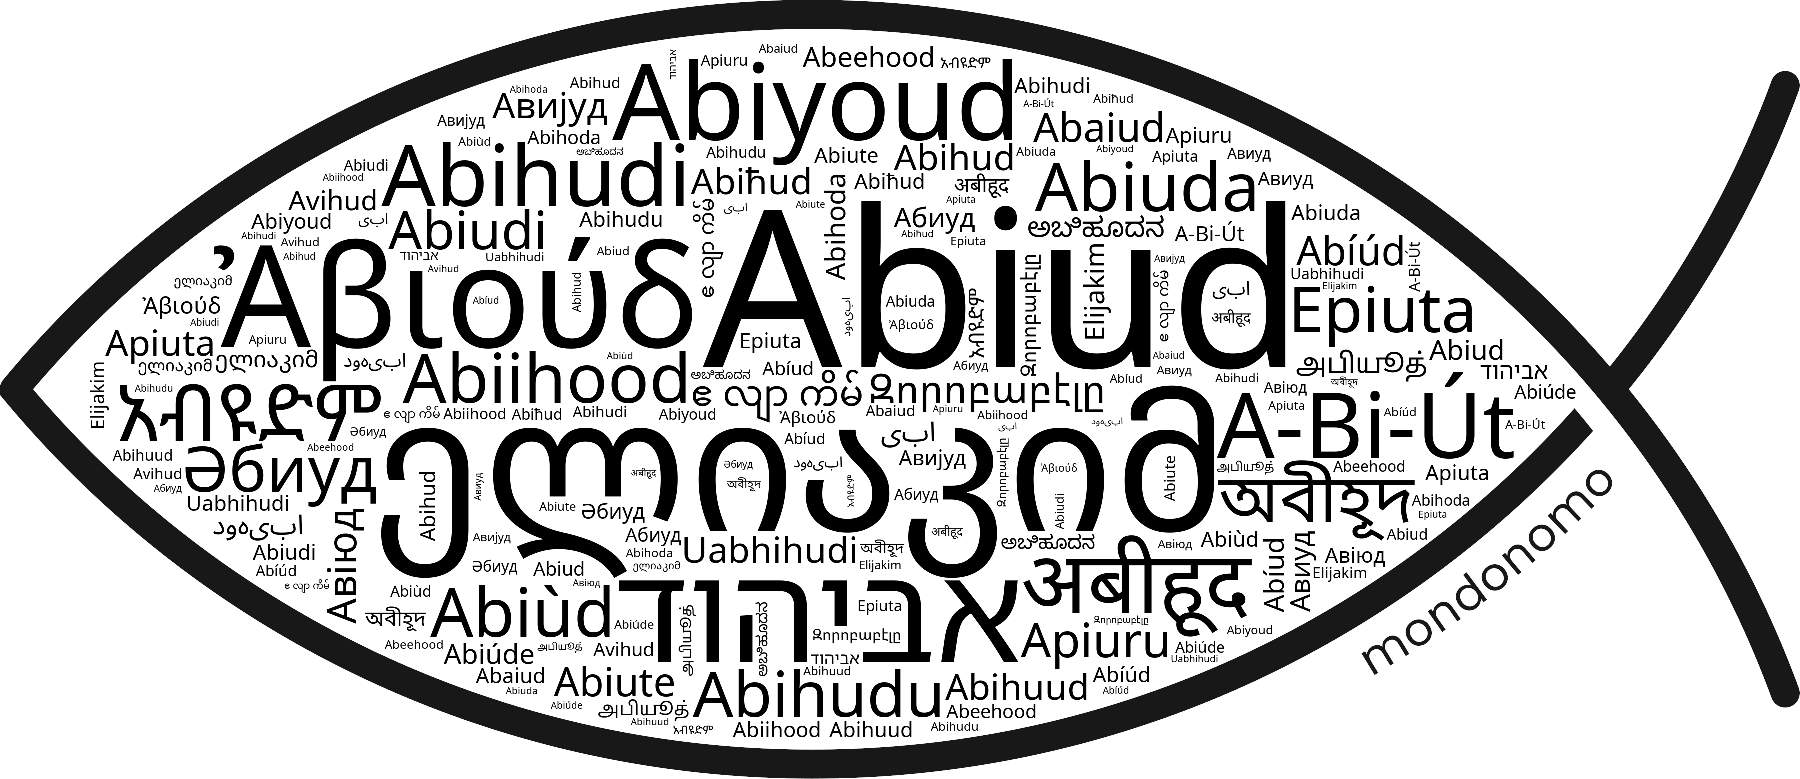 Name Abiud in the world's Bibles